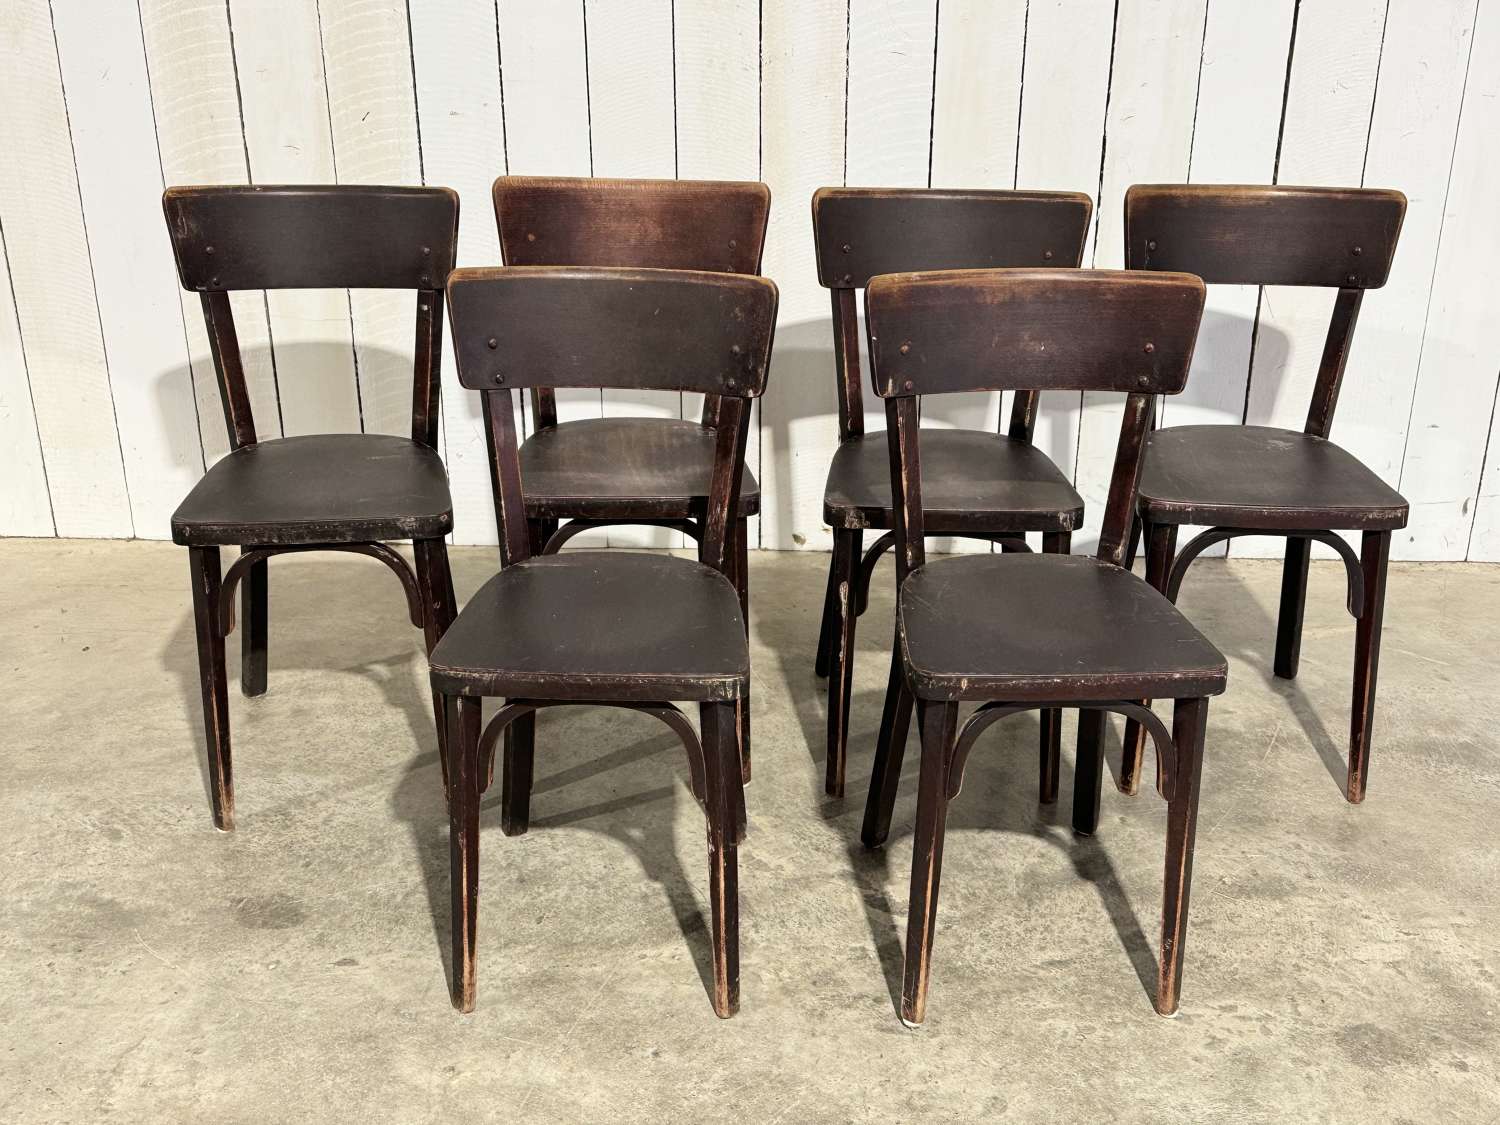 A set of 6 bentwood dining chairs